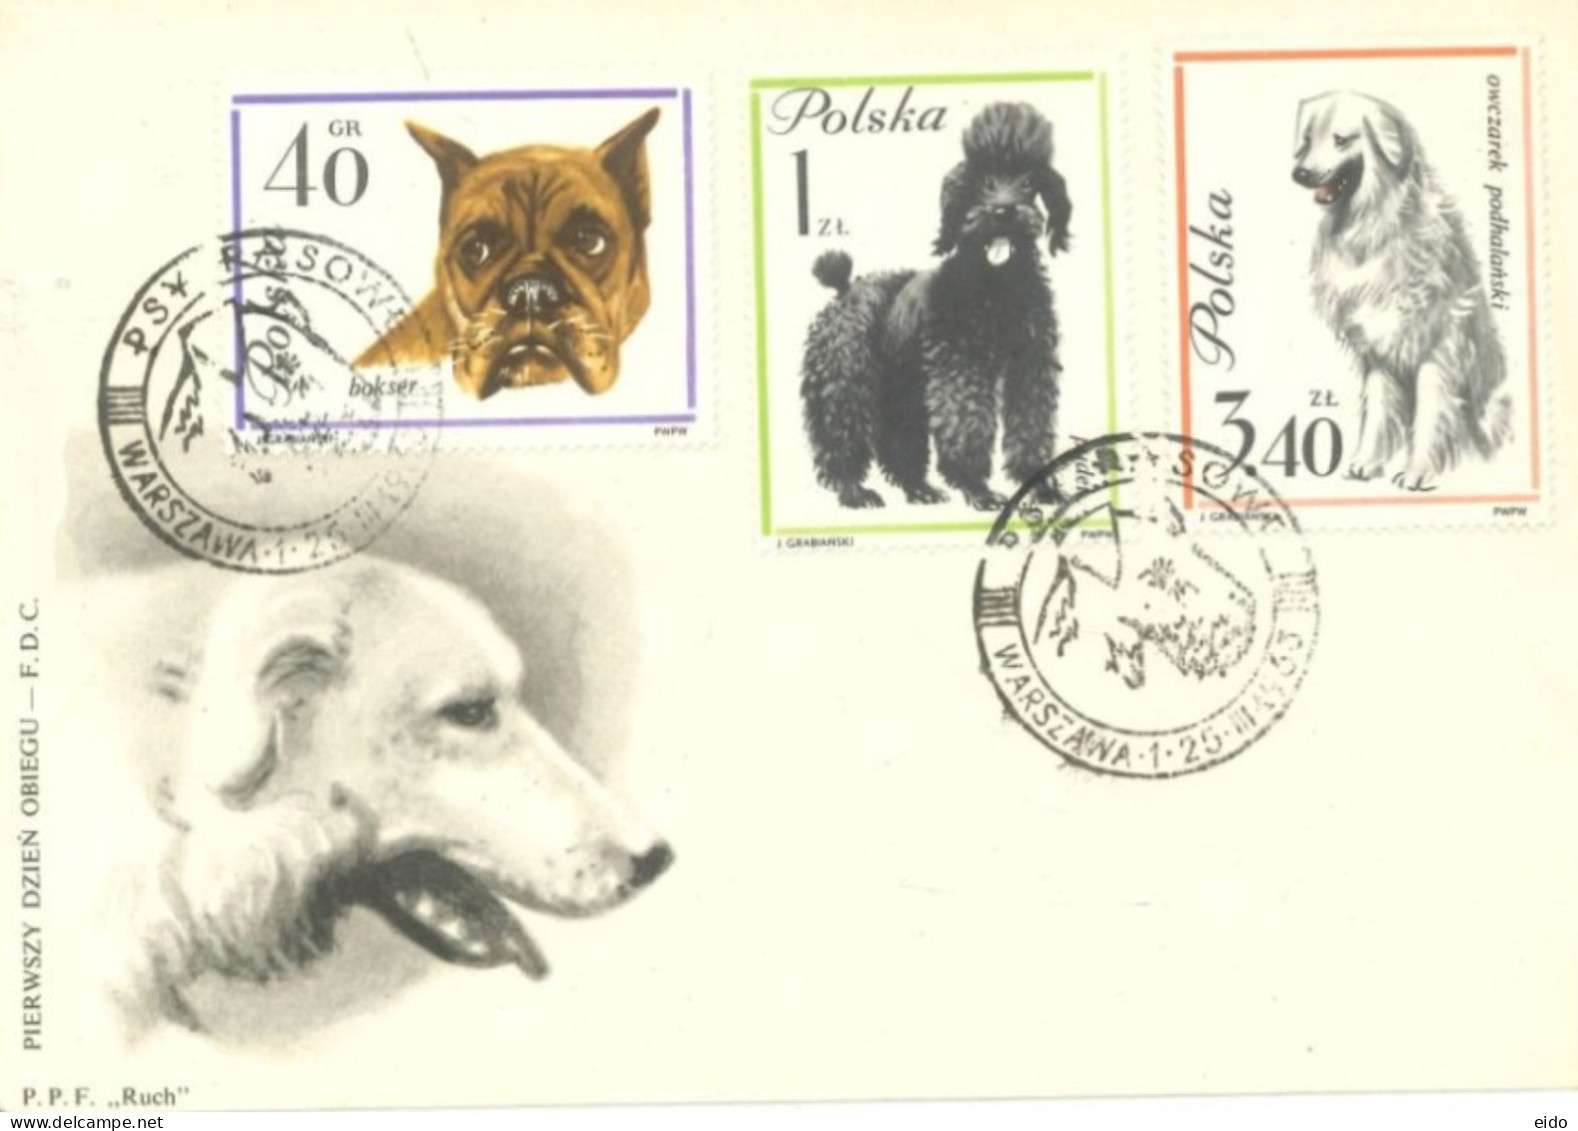 POLAND - 1963, FDC STAMPS OF DOGS TYPE,NOT USED.. - Covers & Documents